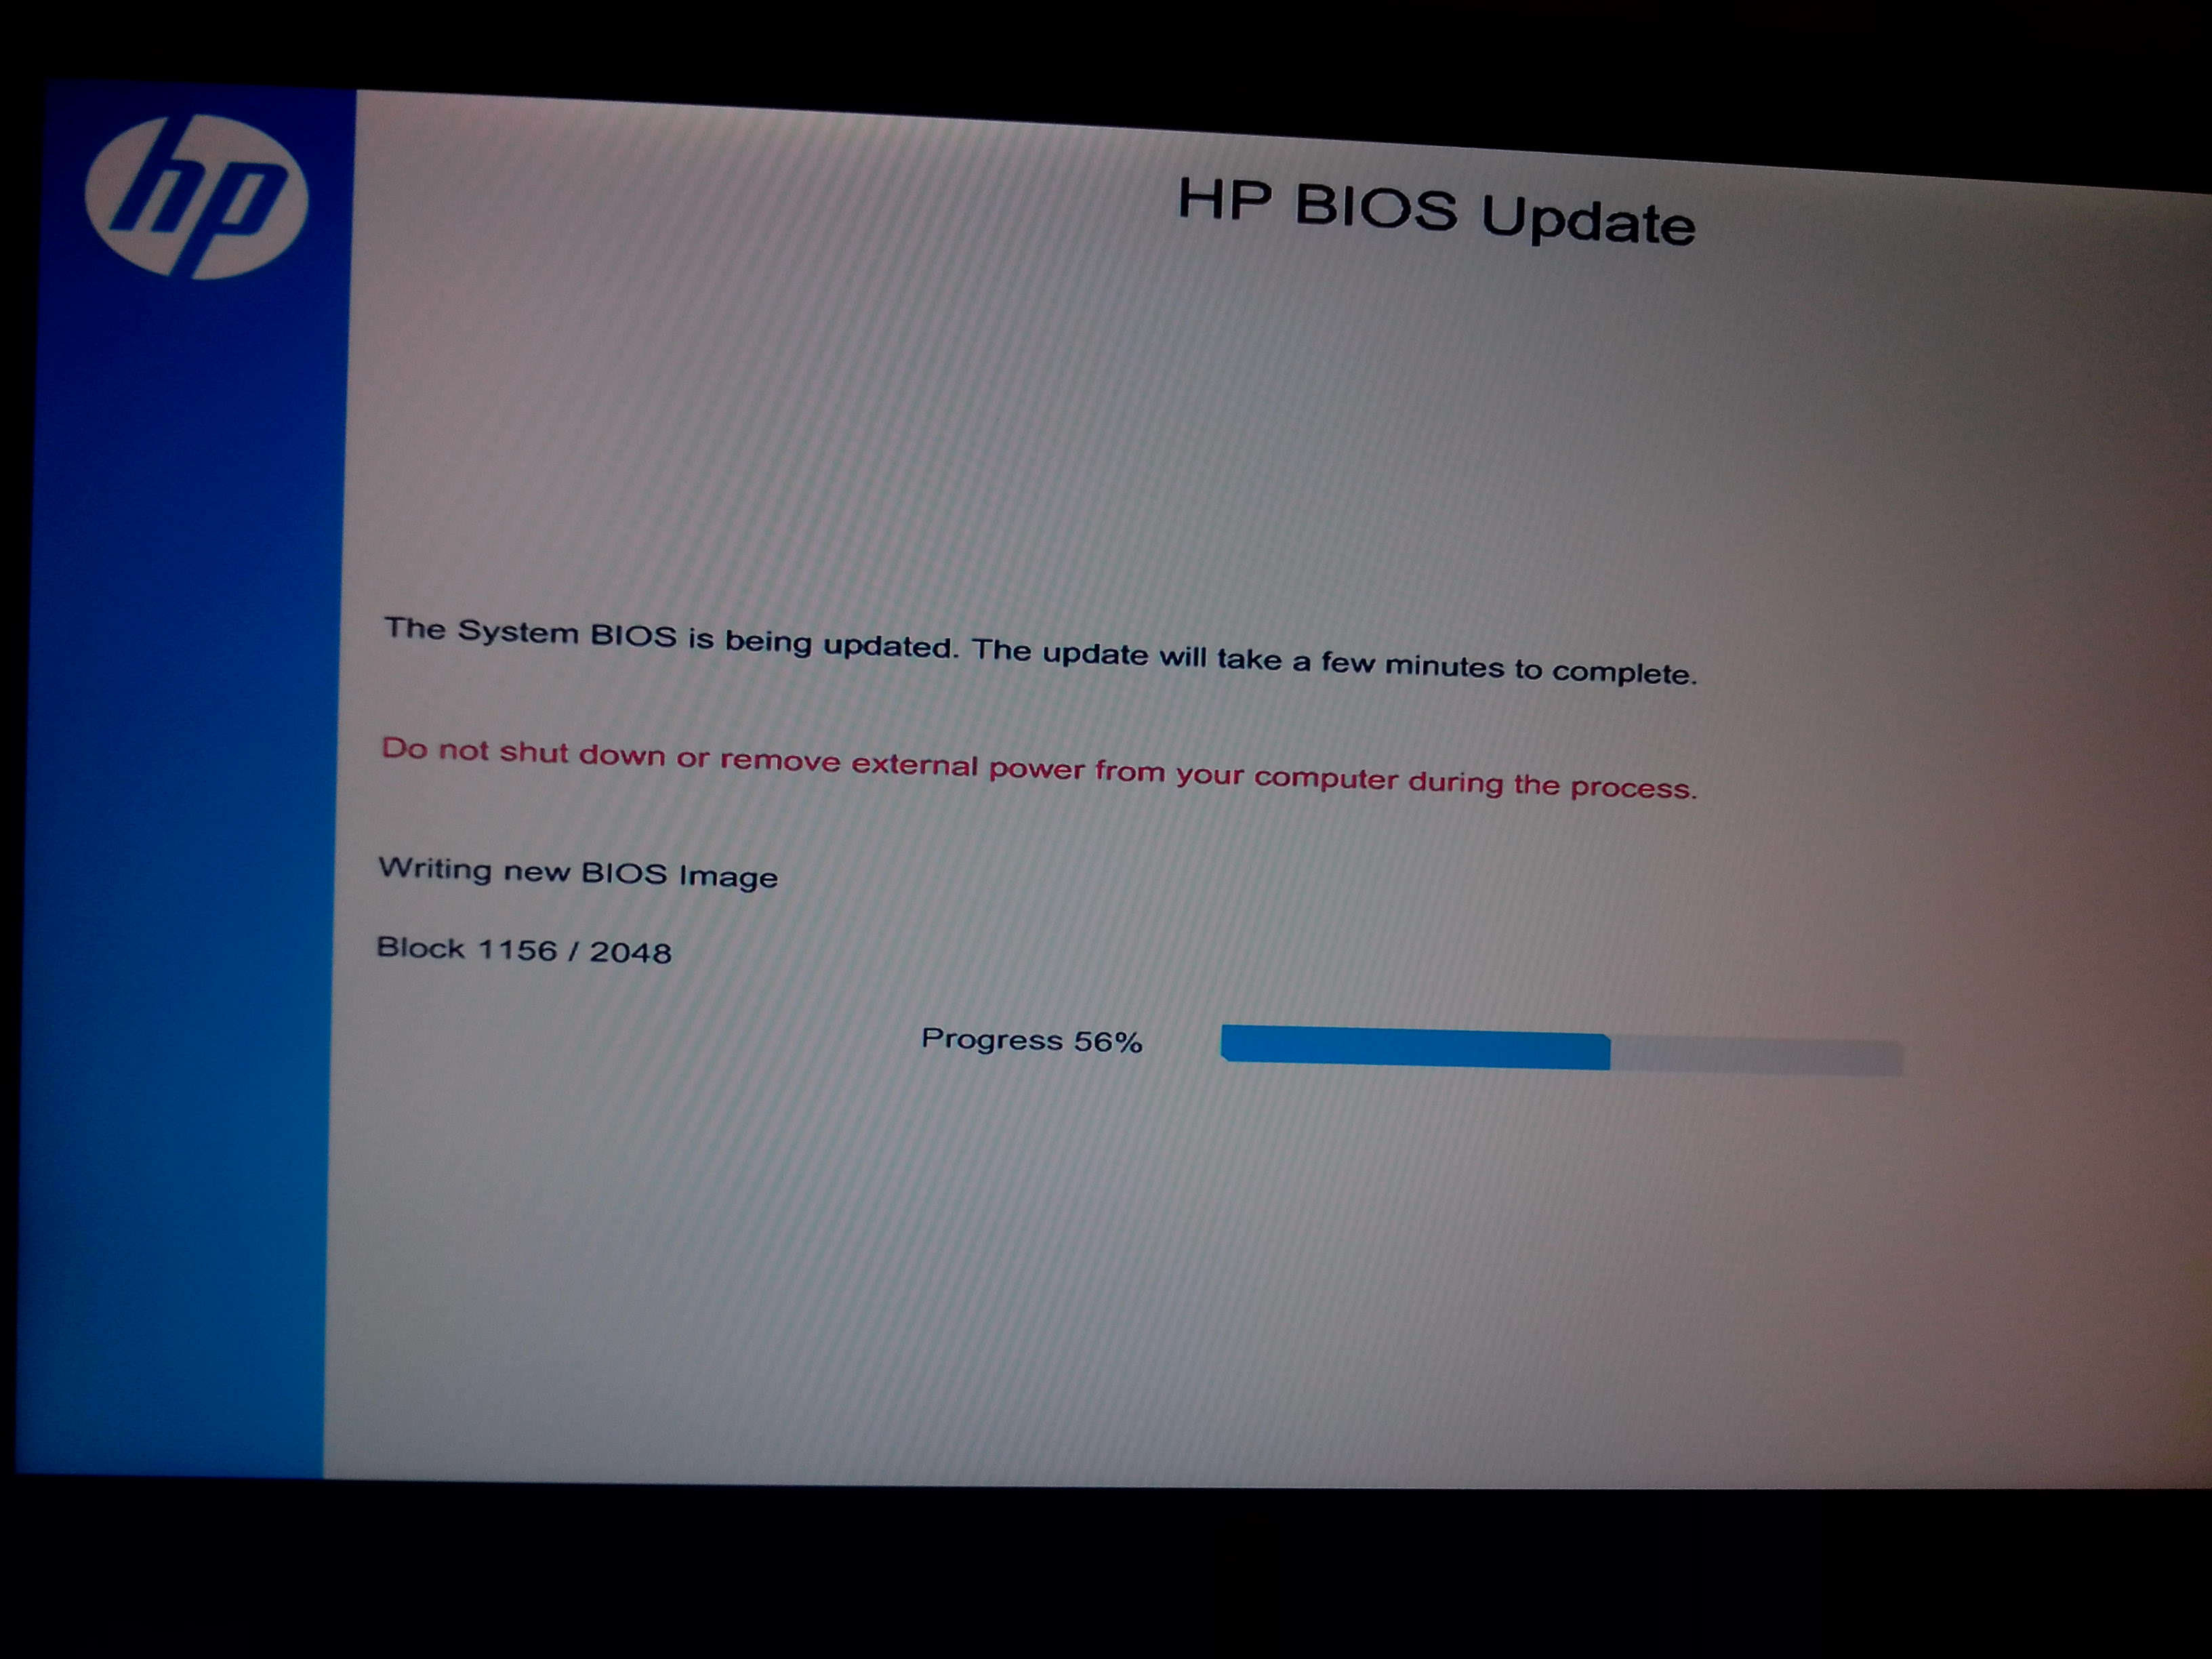 Update system bios. BIOS update. The System BIOS is being updated. Writing New BIOS image. BIOS is Updating.